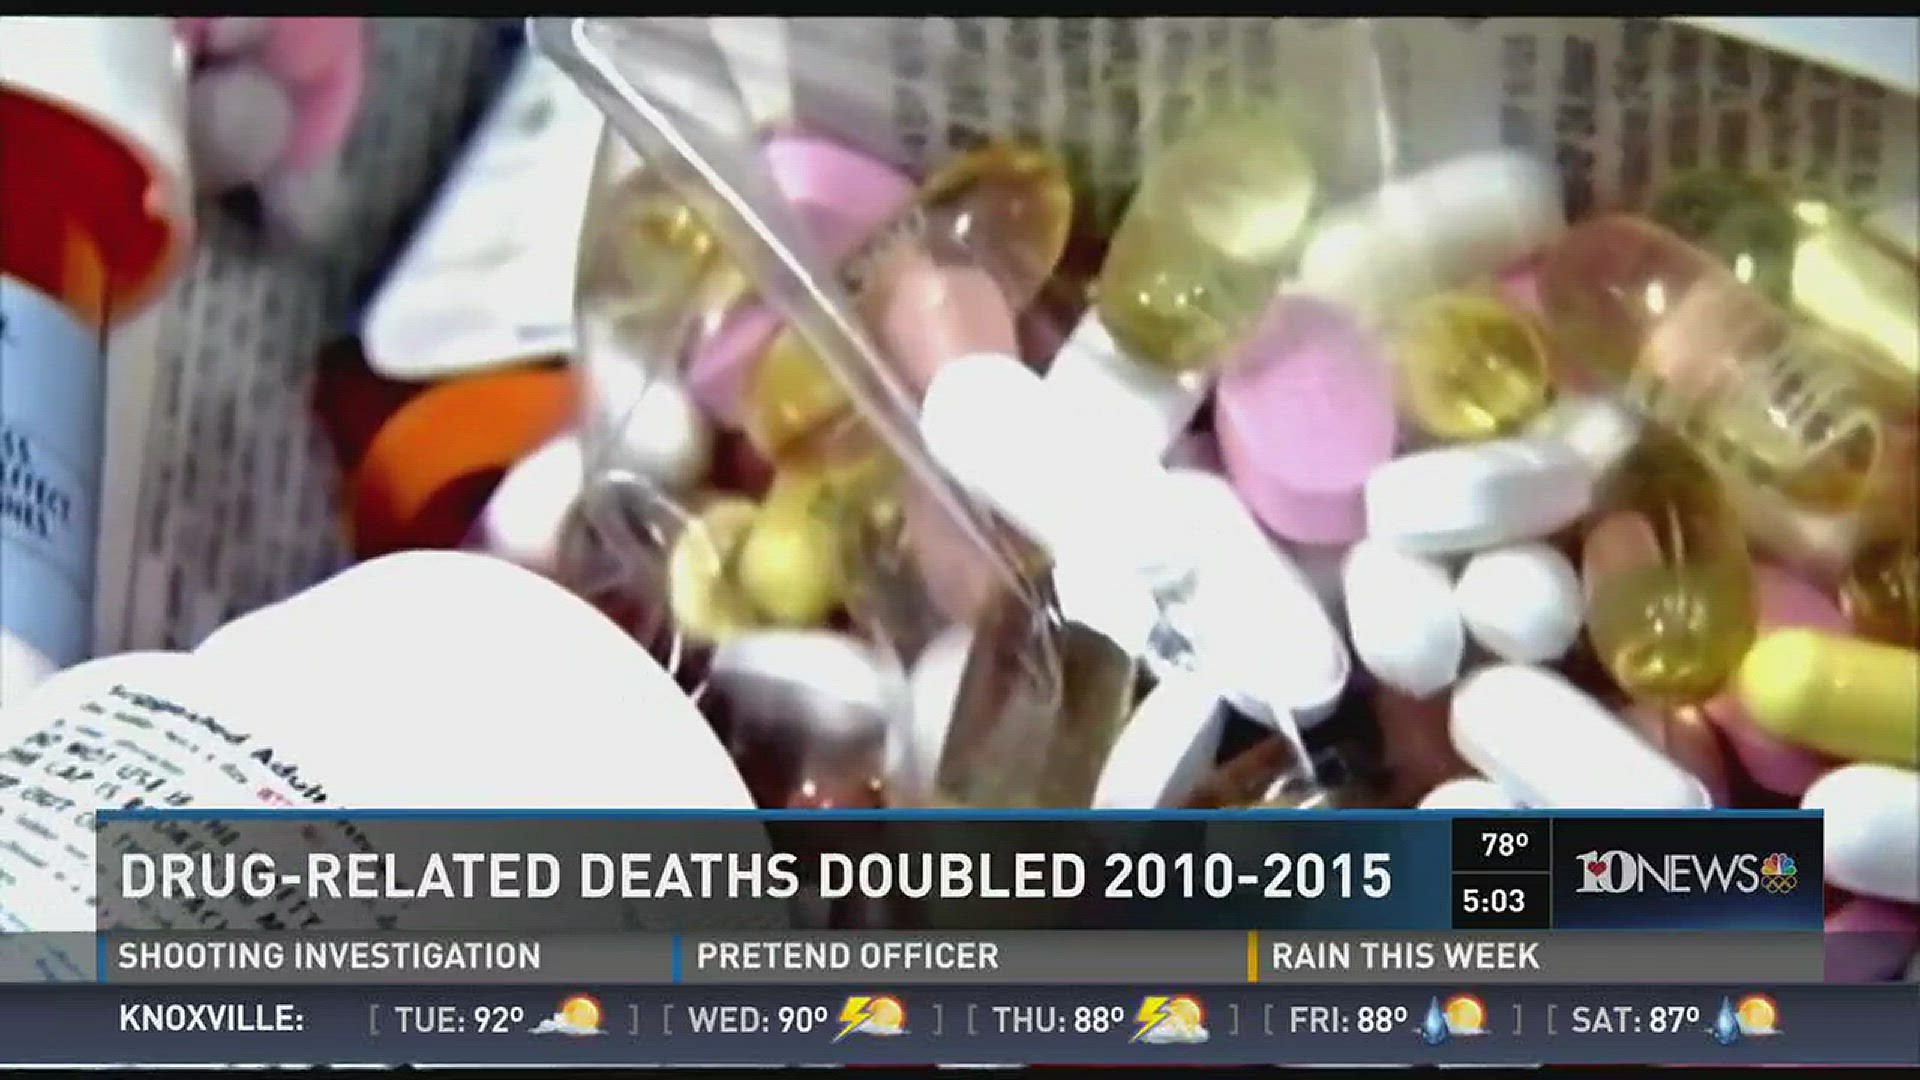 The Knox County Regional Forensics Center released details on the numbers behind local drug-related deaths.